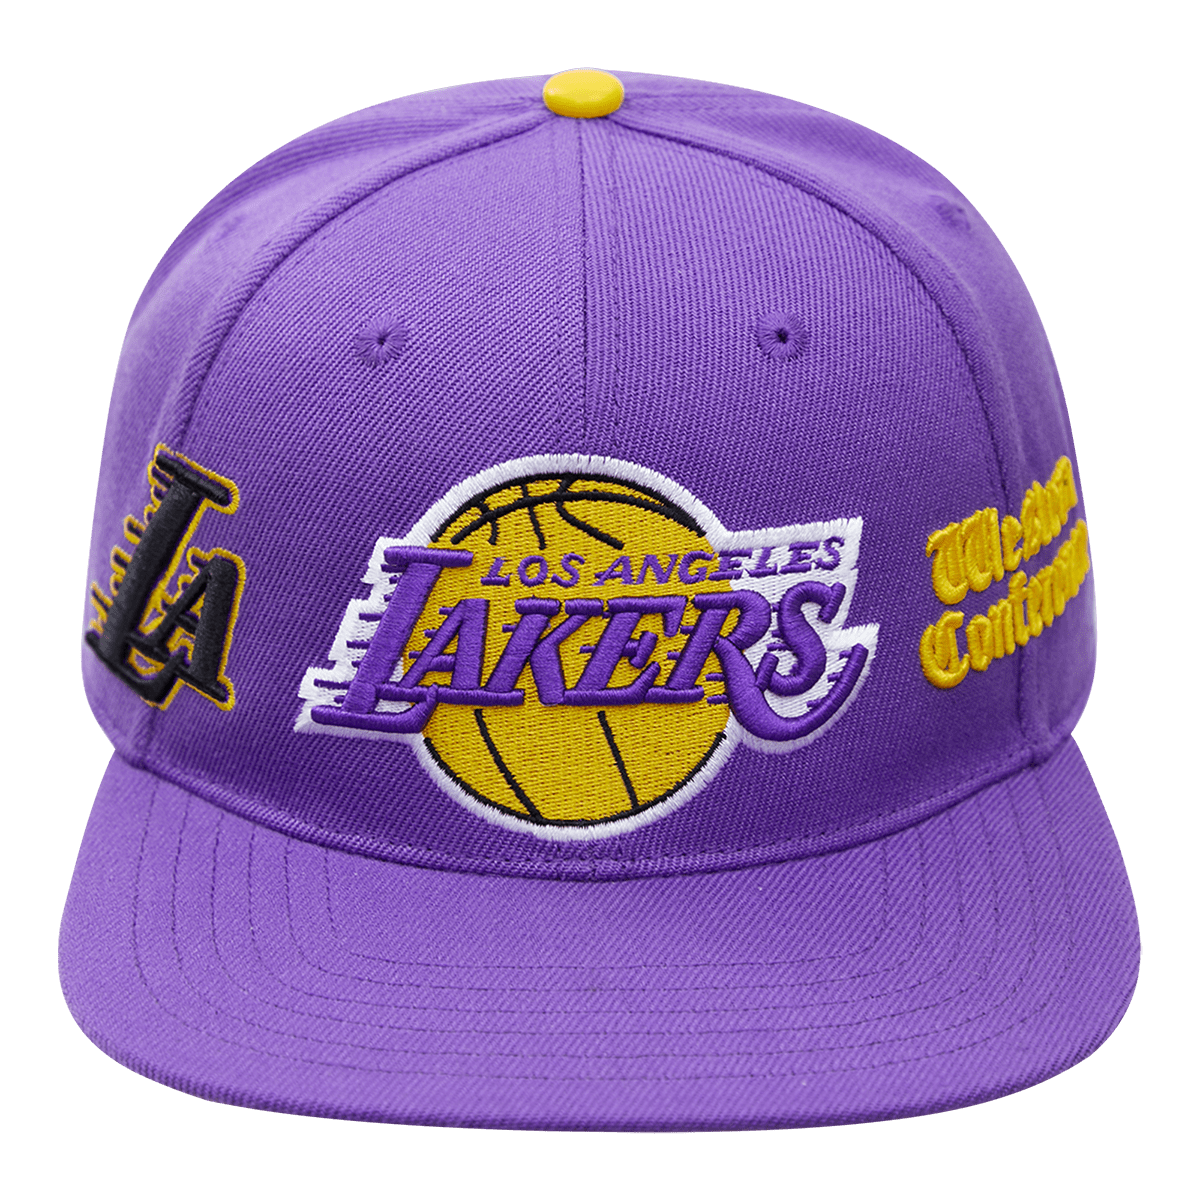 Los Angeles Lakers Purple NBA What the? Snapback Hat